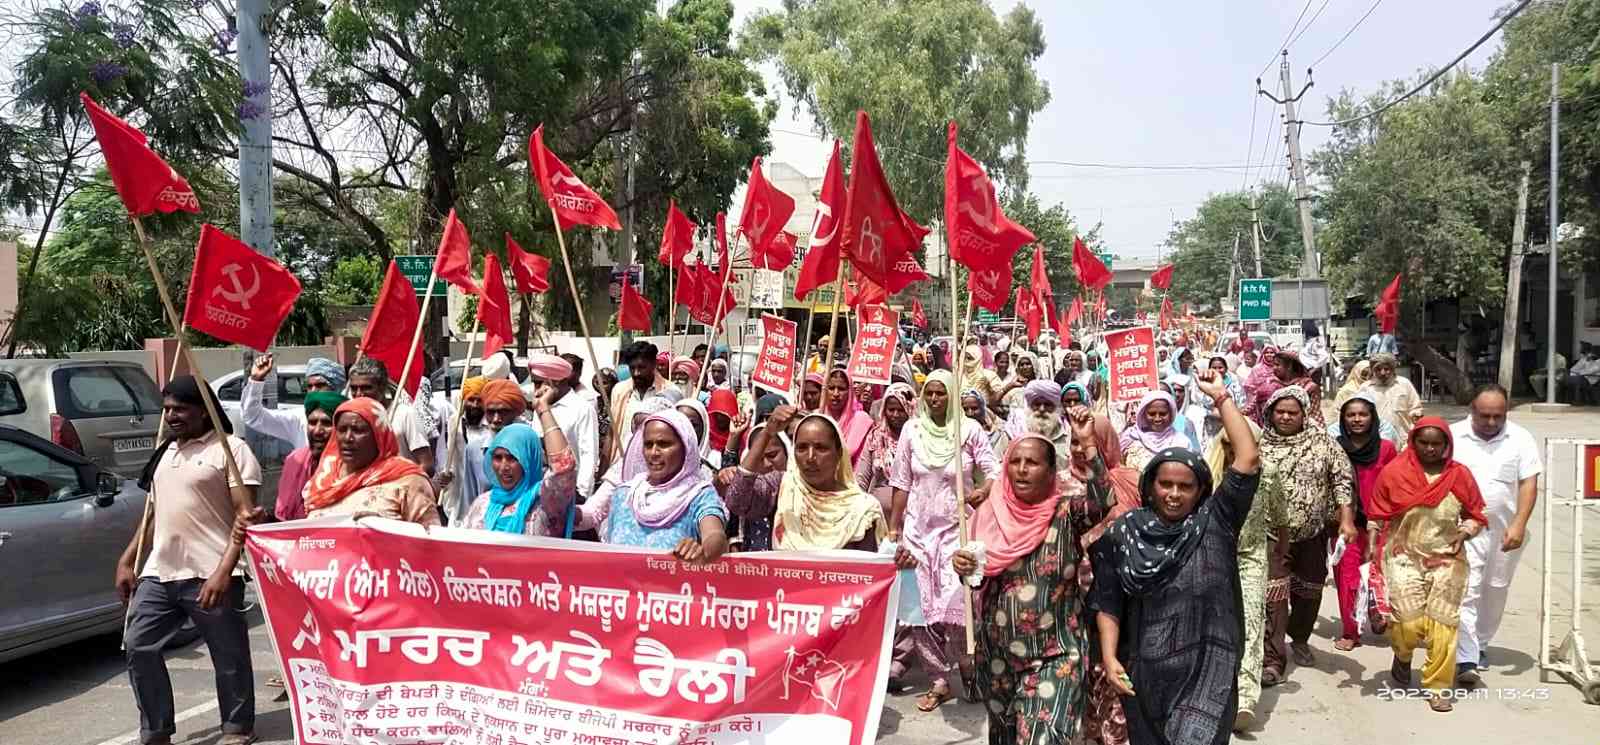 carrying-red-flags-in-barnala-punjab